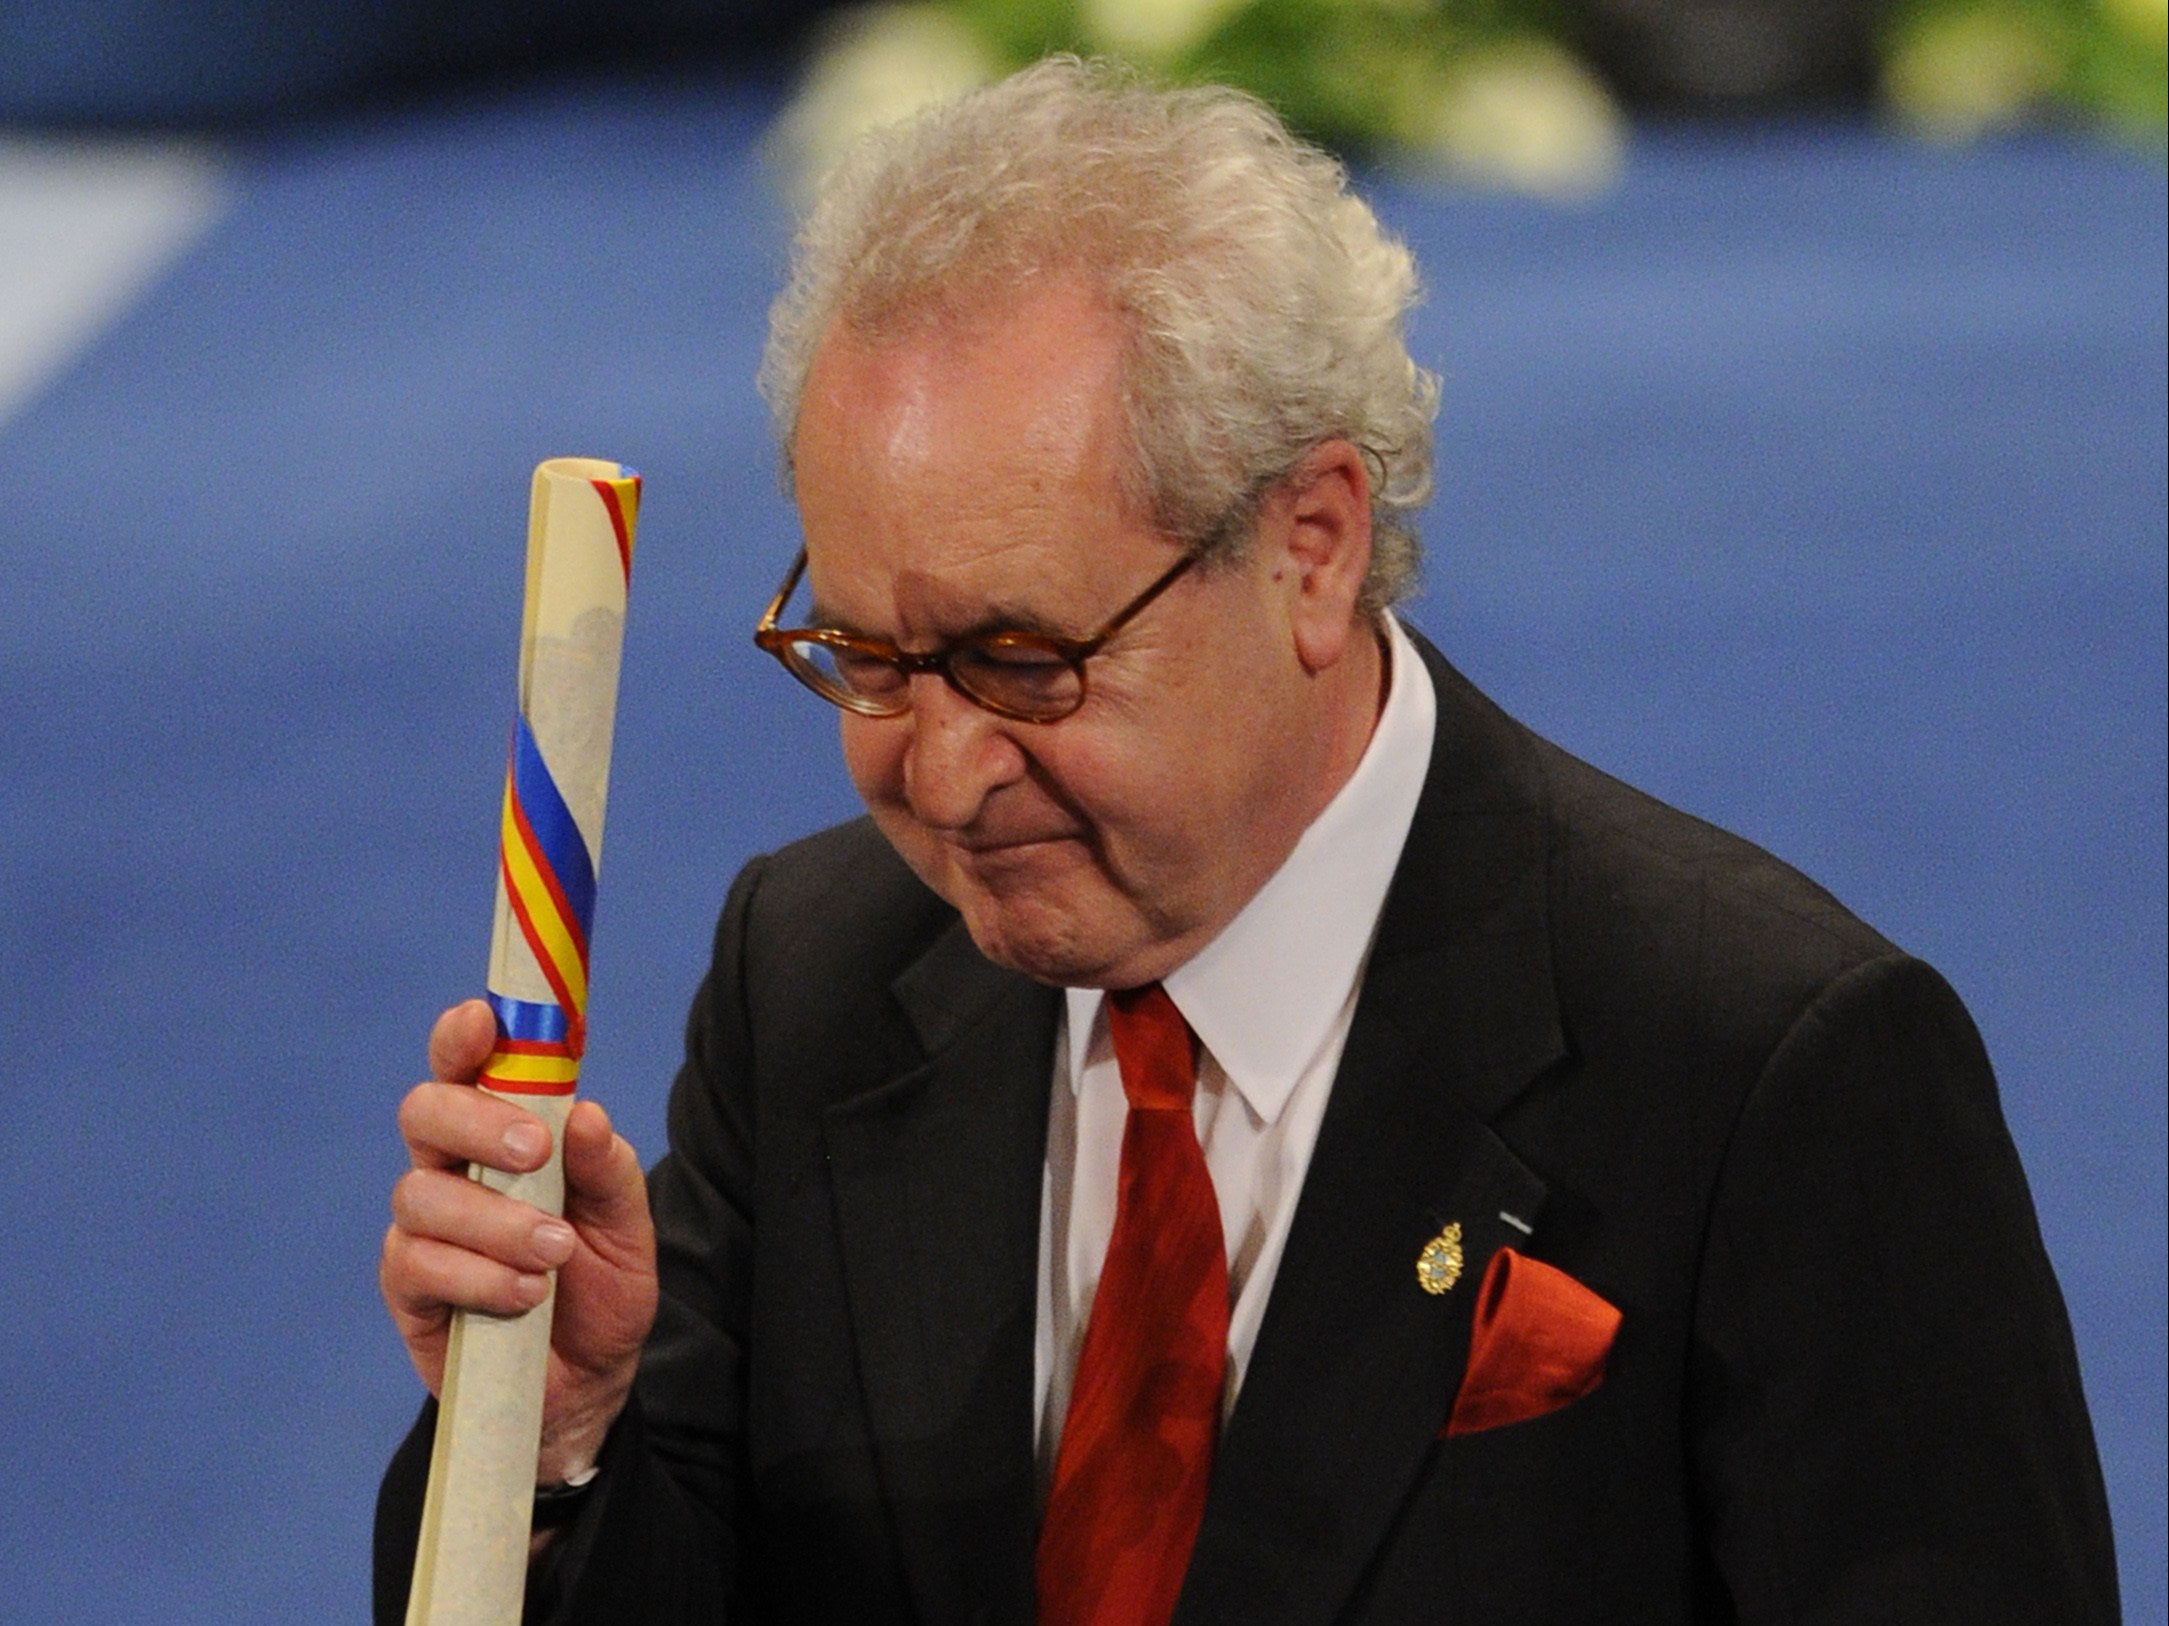 Banville pictured in 2014 accepting the Prince of Asturias award from Spain’s King Felipe VI